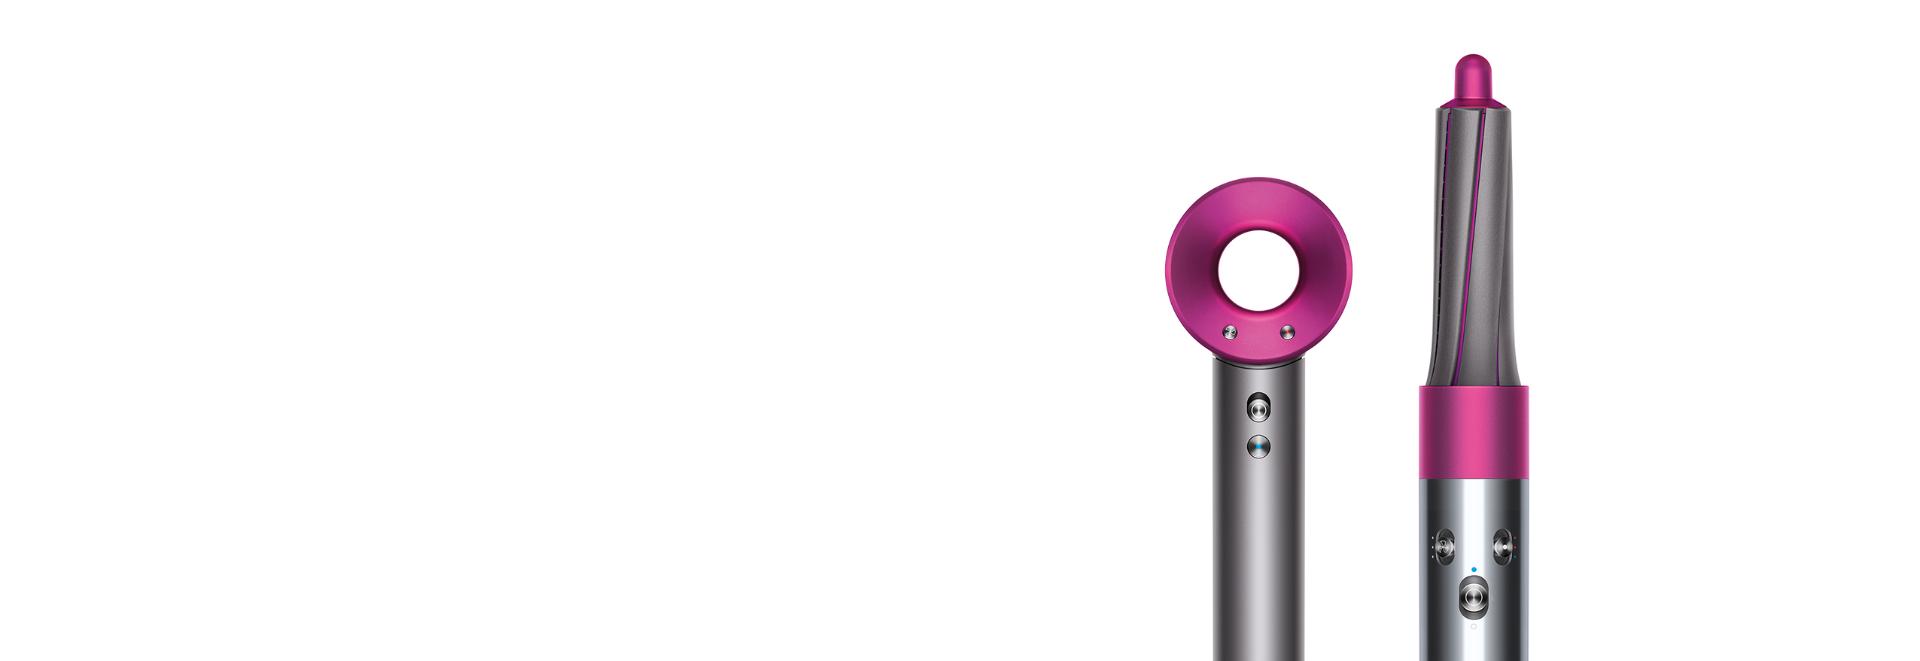 Dyson Supersonic™吹风机和Dyson AirWrap™Styler